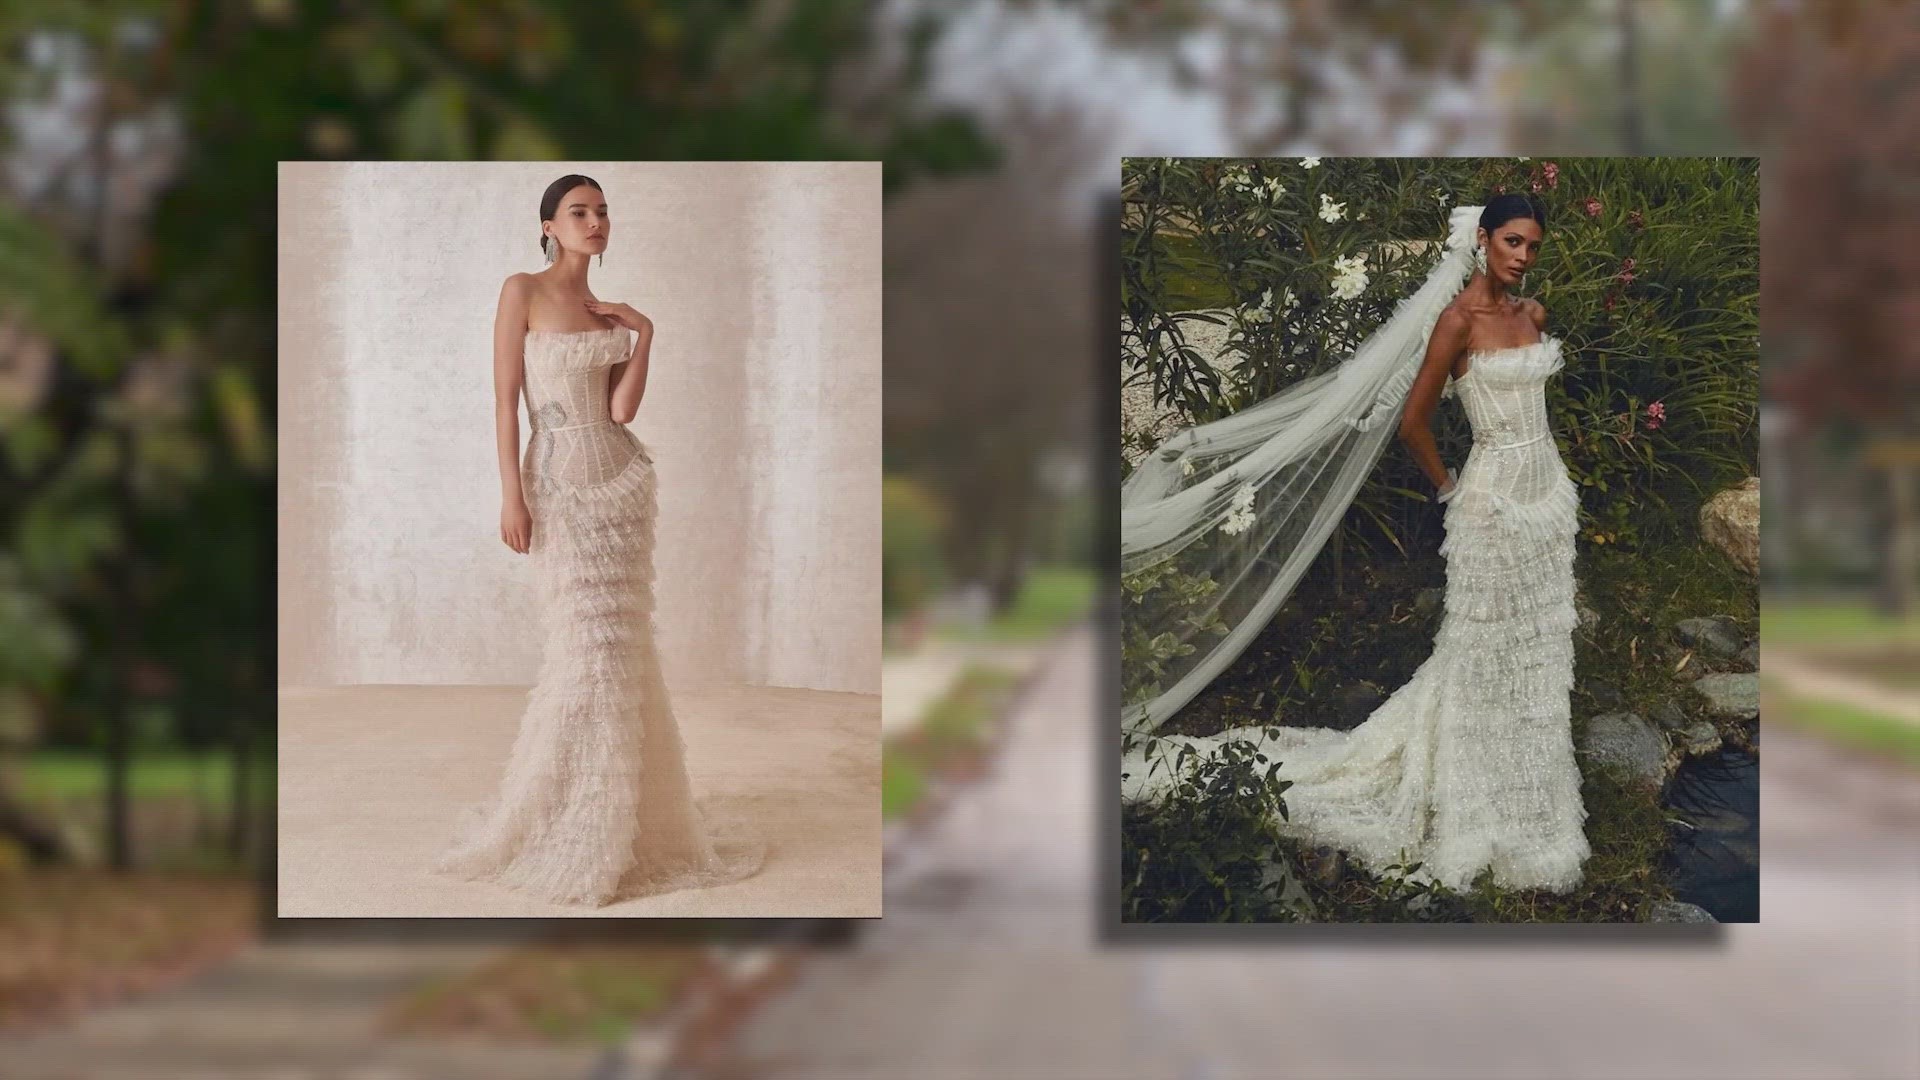 "Out of all the times this could have happened, it happens to my wedding dress," the victim said.